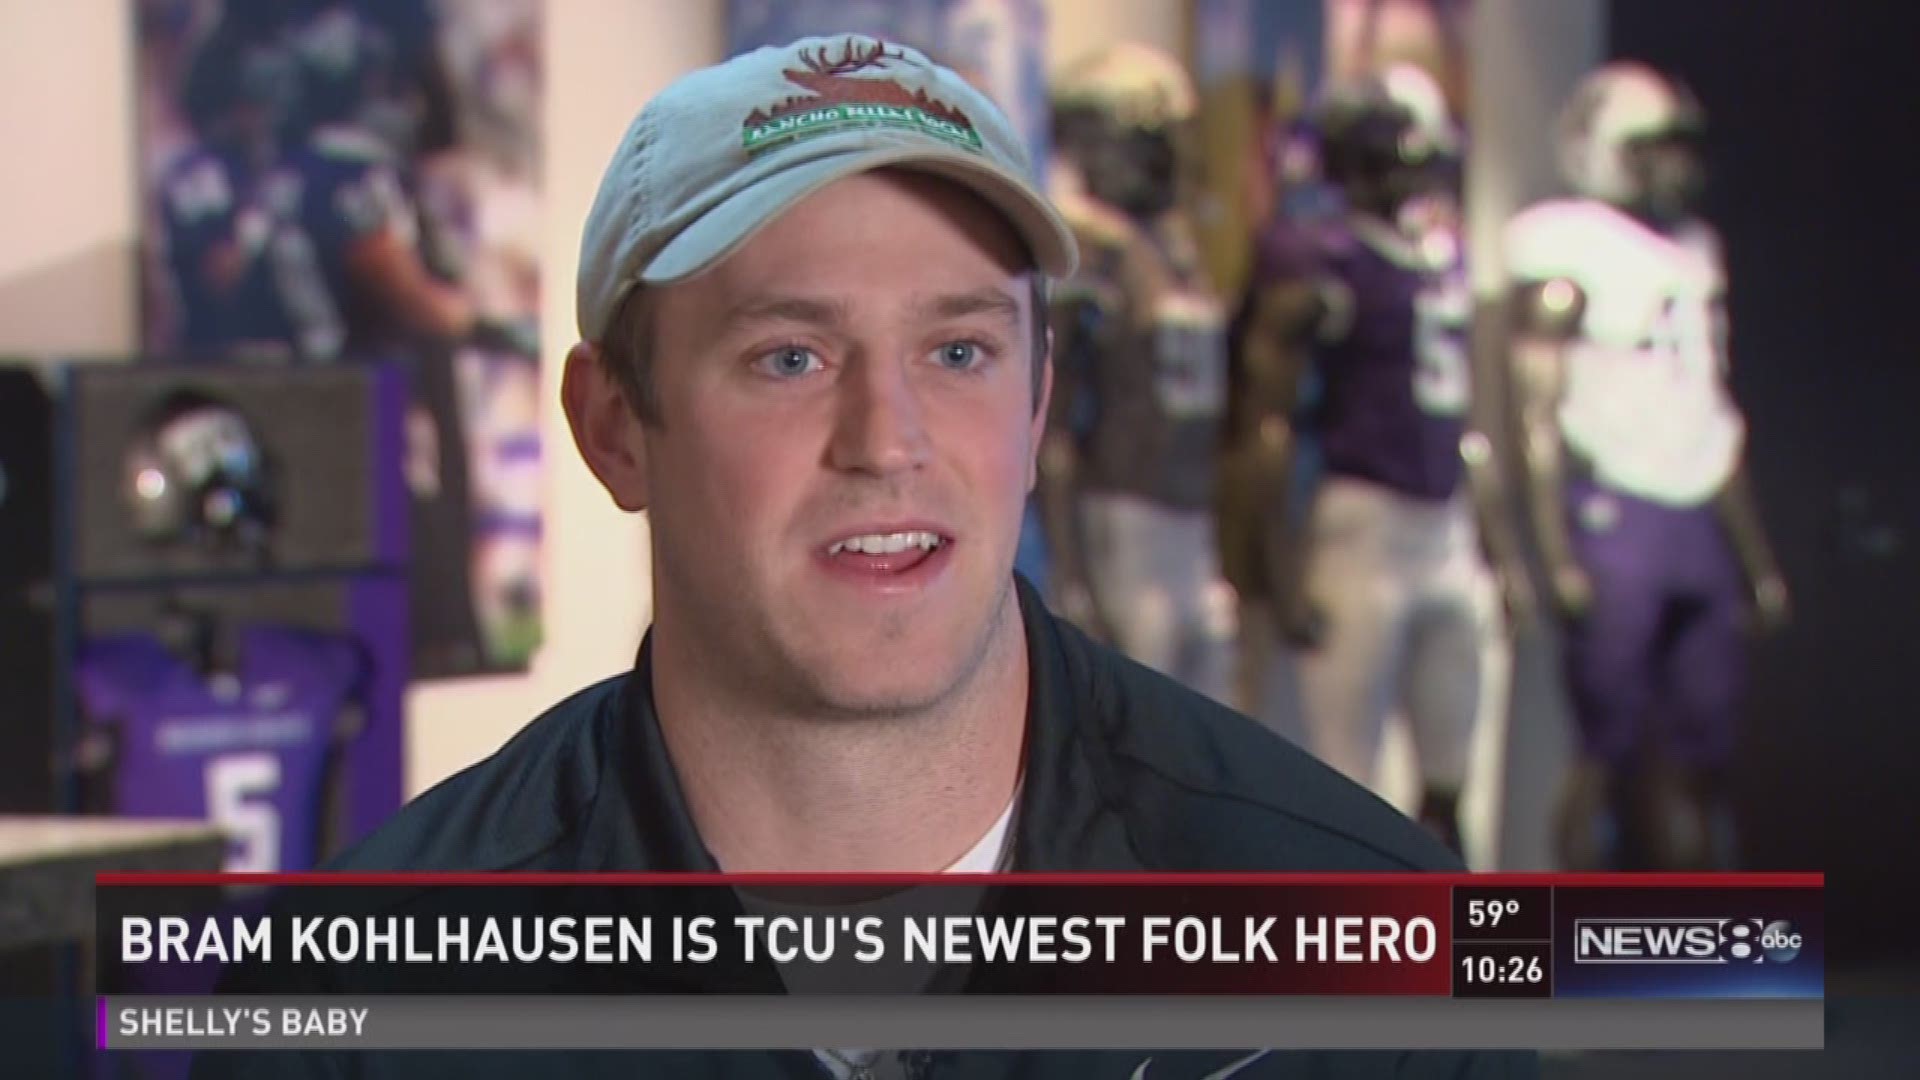 Bram Kohlhausen went from unknown to TCU legend in 30 minutes of football on Jan. 2. Ted Madden visits with Fort Worth's newest folk hero.